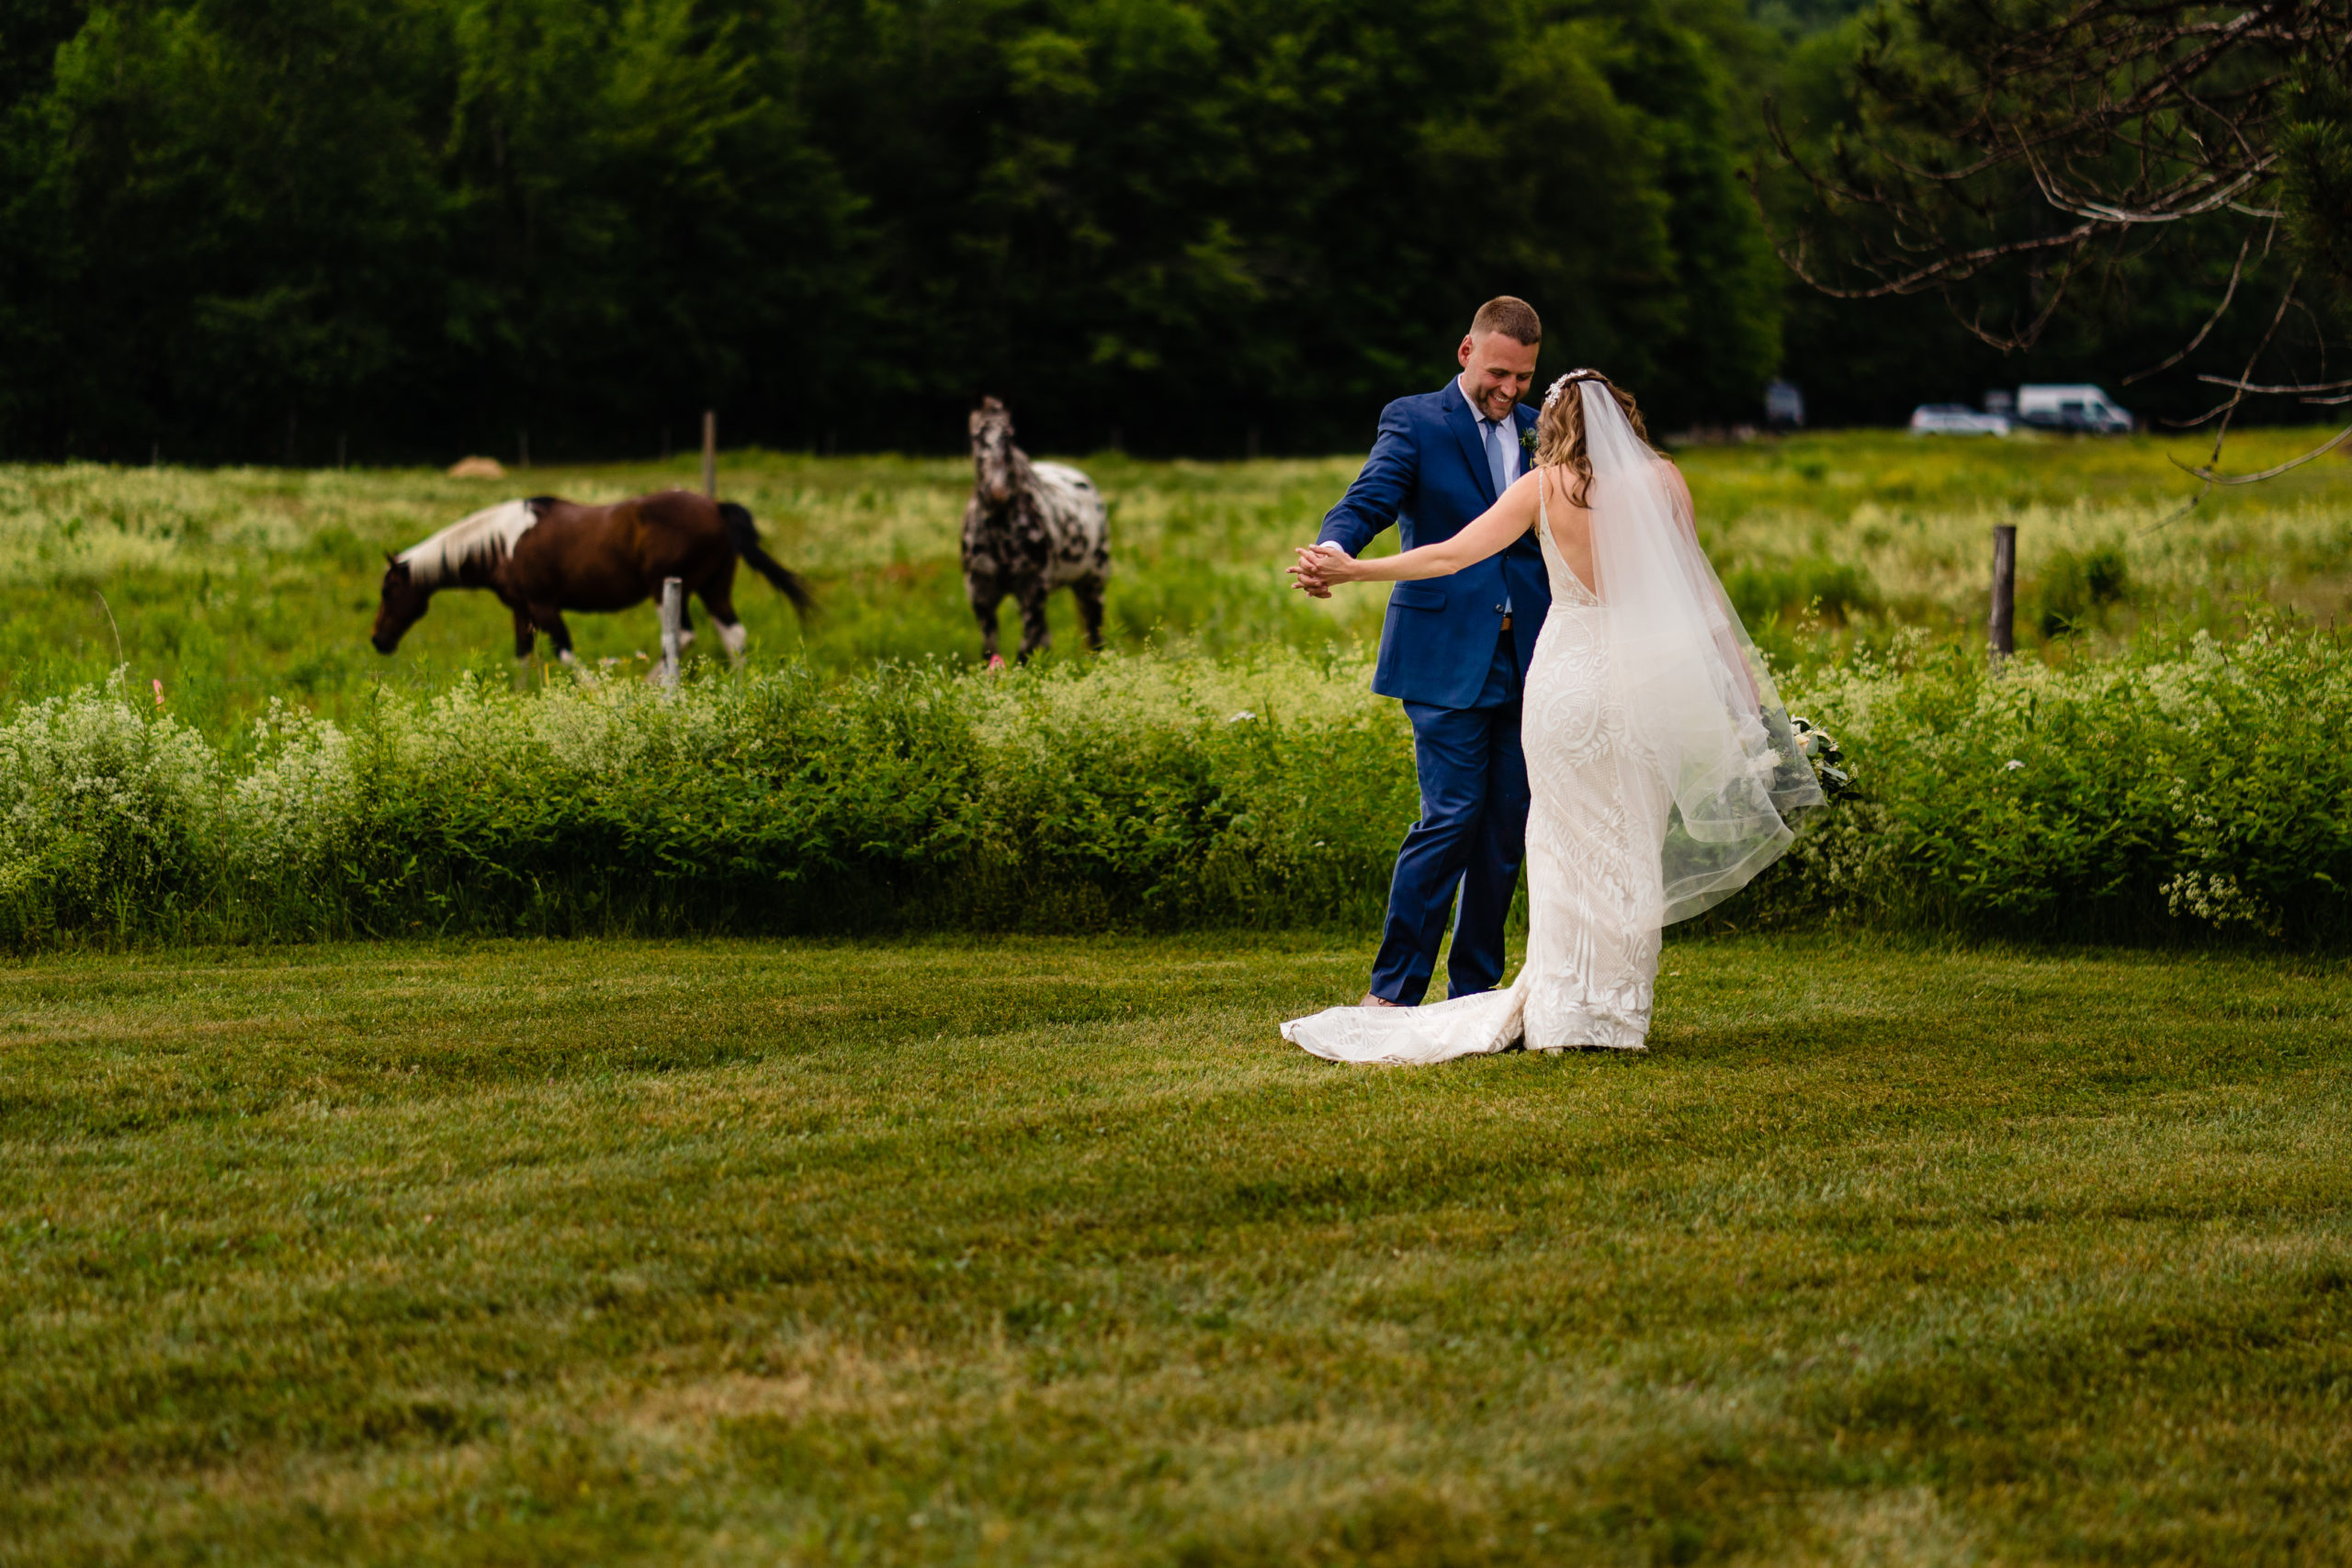 bride and groom dancing in a field with horses in the background